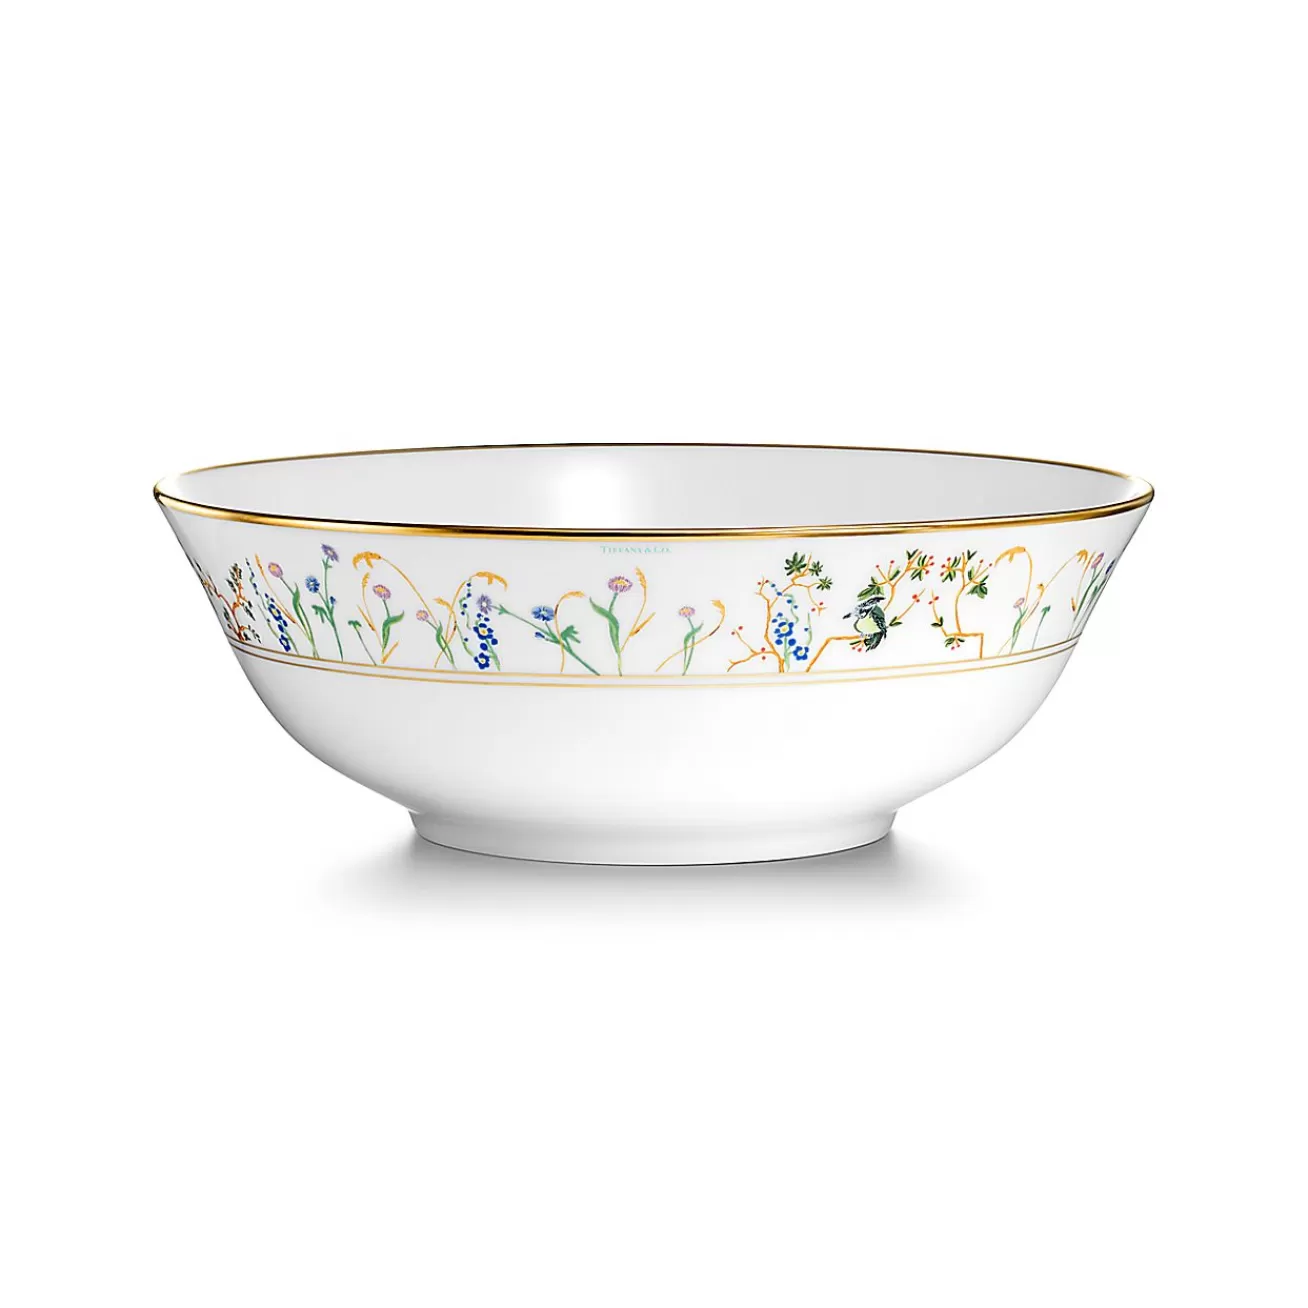 Tiffany & Co. Tiffany Jardin Serving Bowl in Porcelain | ^ The Home | Housewarming Gifts